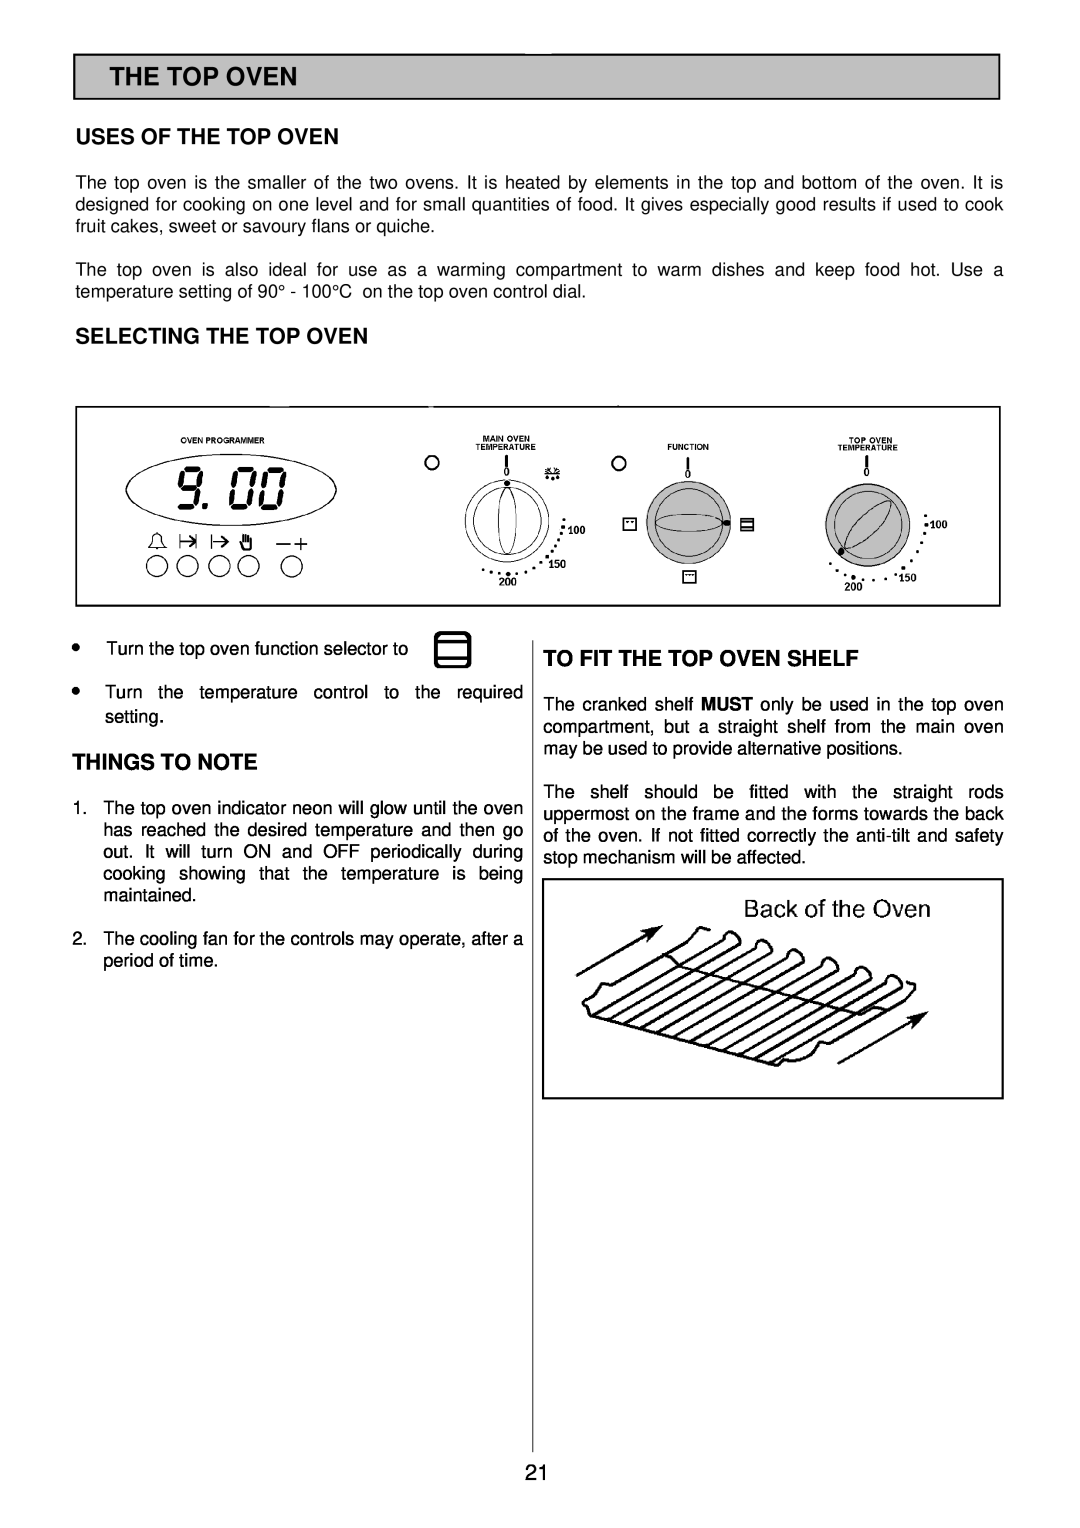 Tricity Bendix TBD913 Uses Of The Top Oven, Selecting The Top Oven, To Fit The Top Oven Shelf, Things To Note 